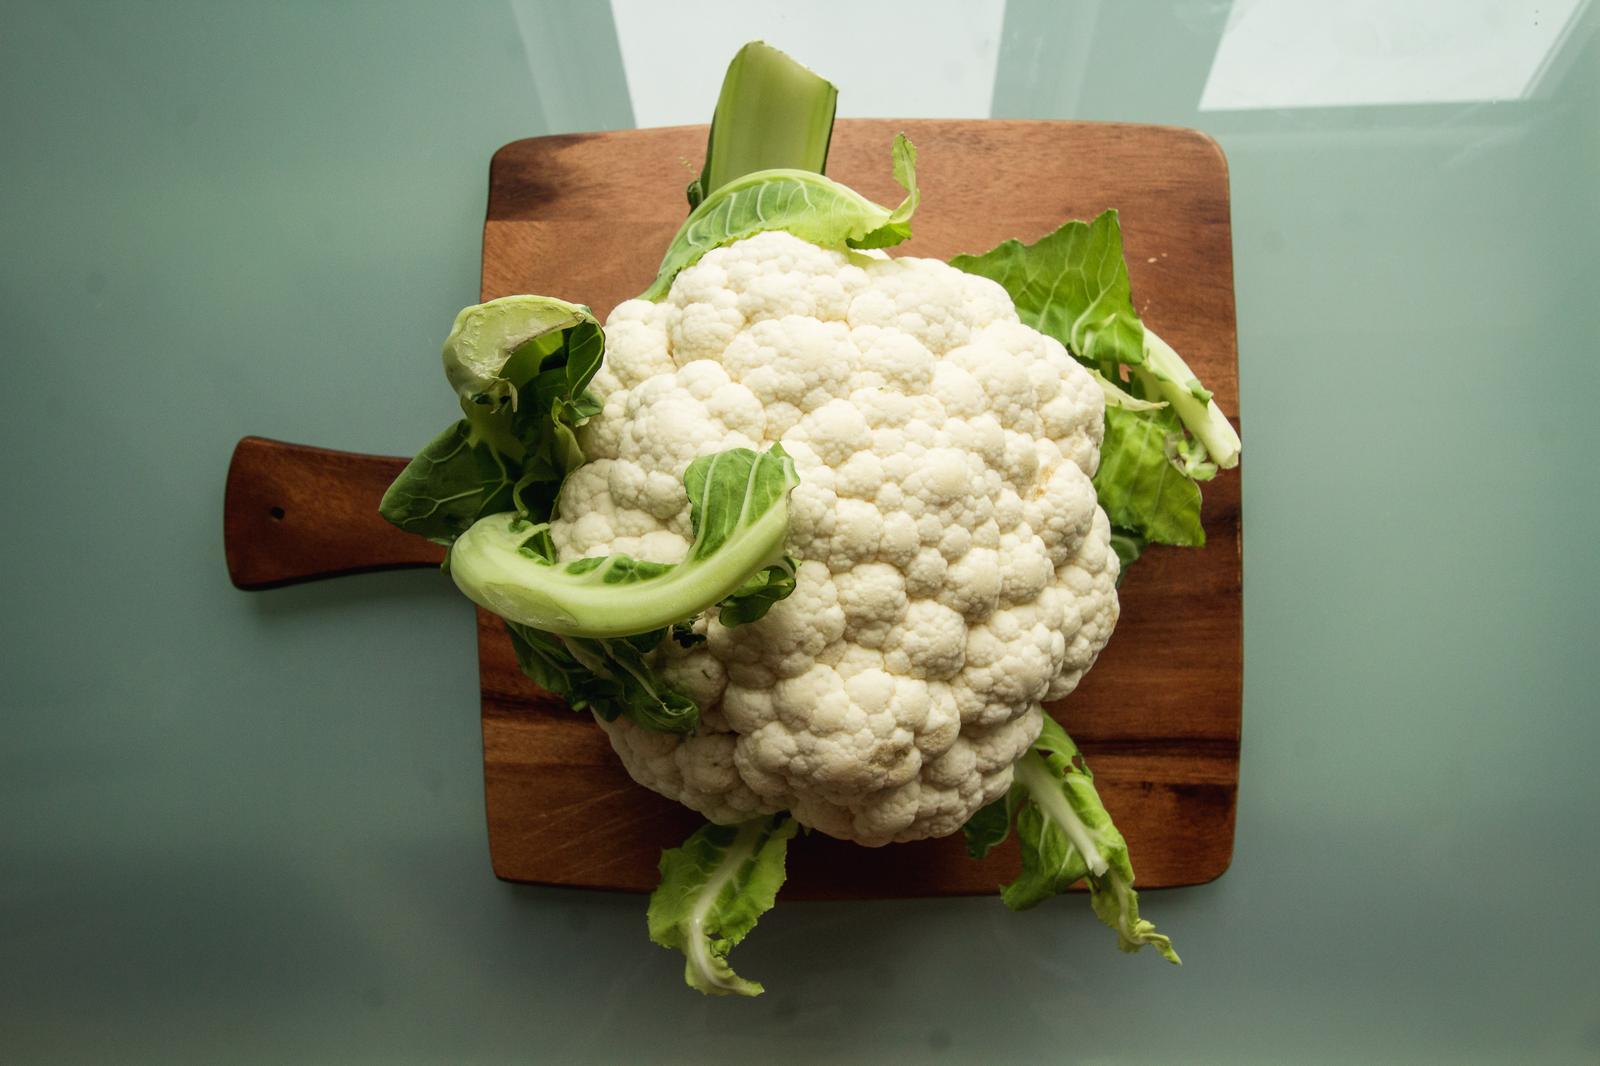 If You Want to Know How ❤️ Romantic You Are, Pick Some Unpopular Foods to Find Out Cauliflower